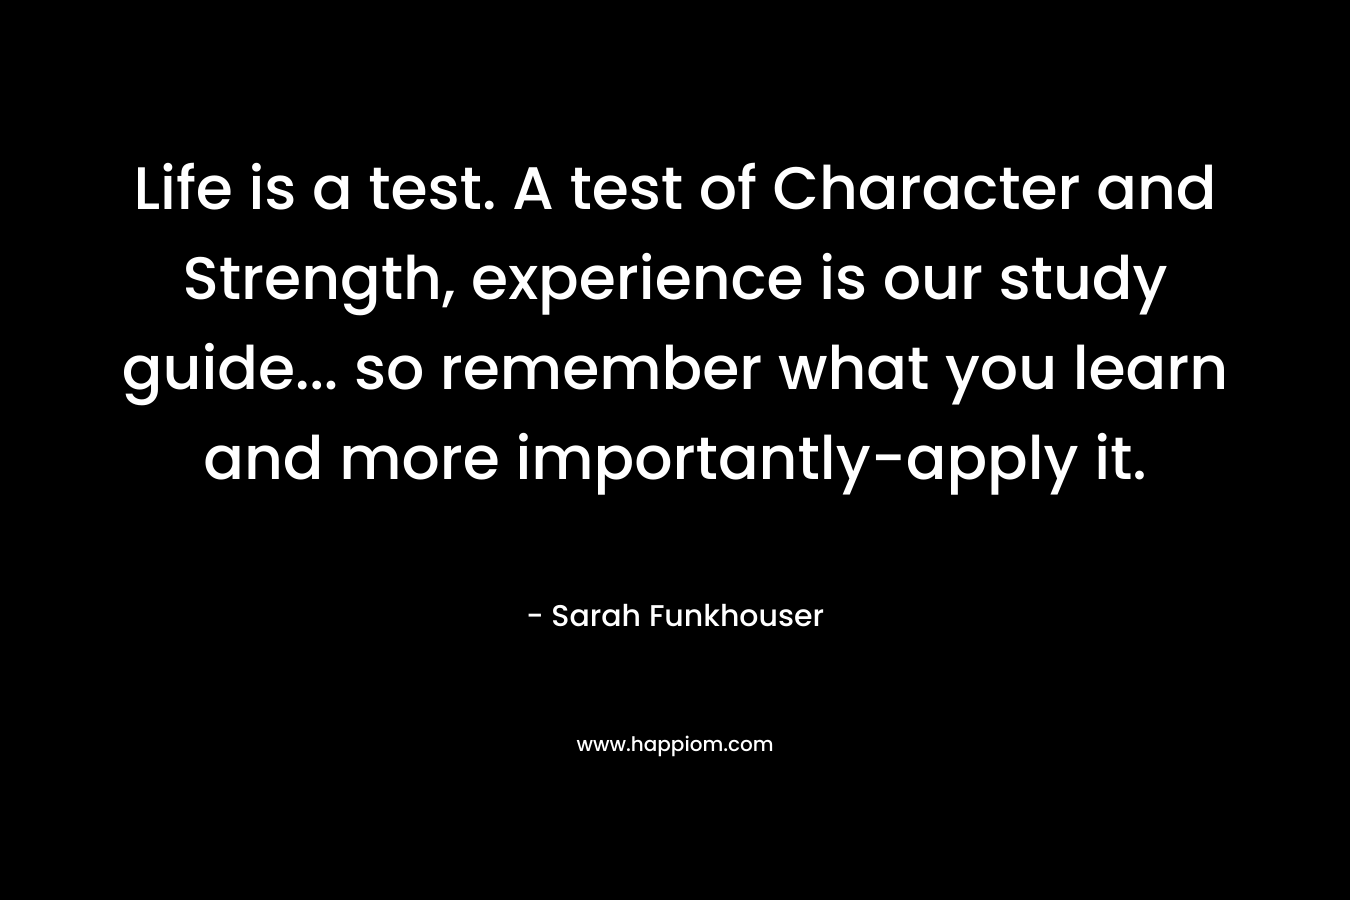 Life is a test. A test of Character and Strength, experience is our study guide... so remember what you learn and more importantly-apply it.